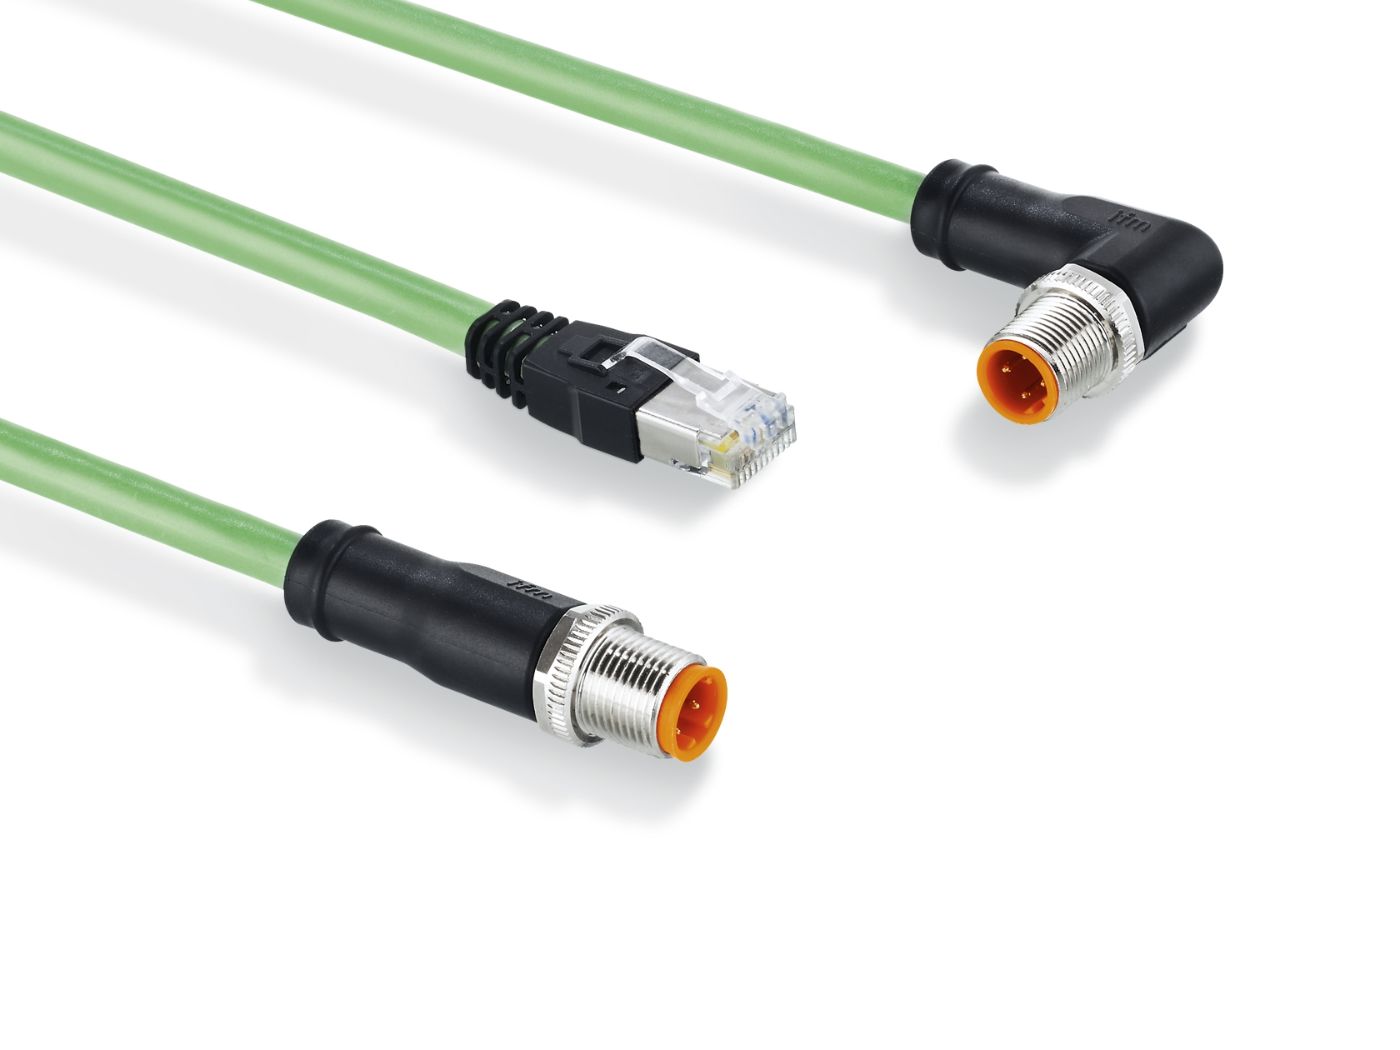 leeg Attent neef ecolink M12 / RJ45: Ethernet cables for industrial applications - ifm